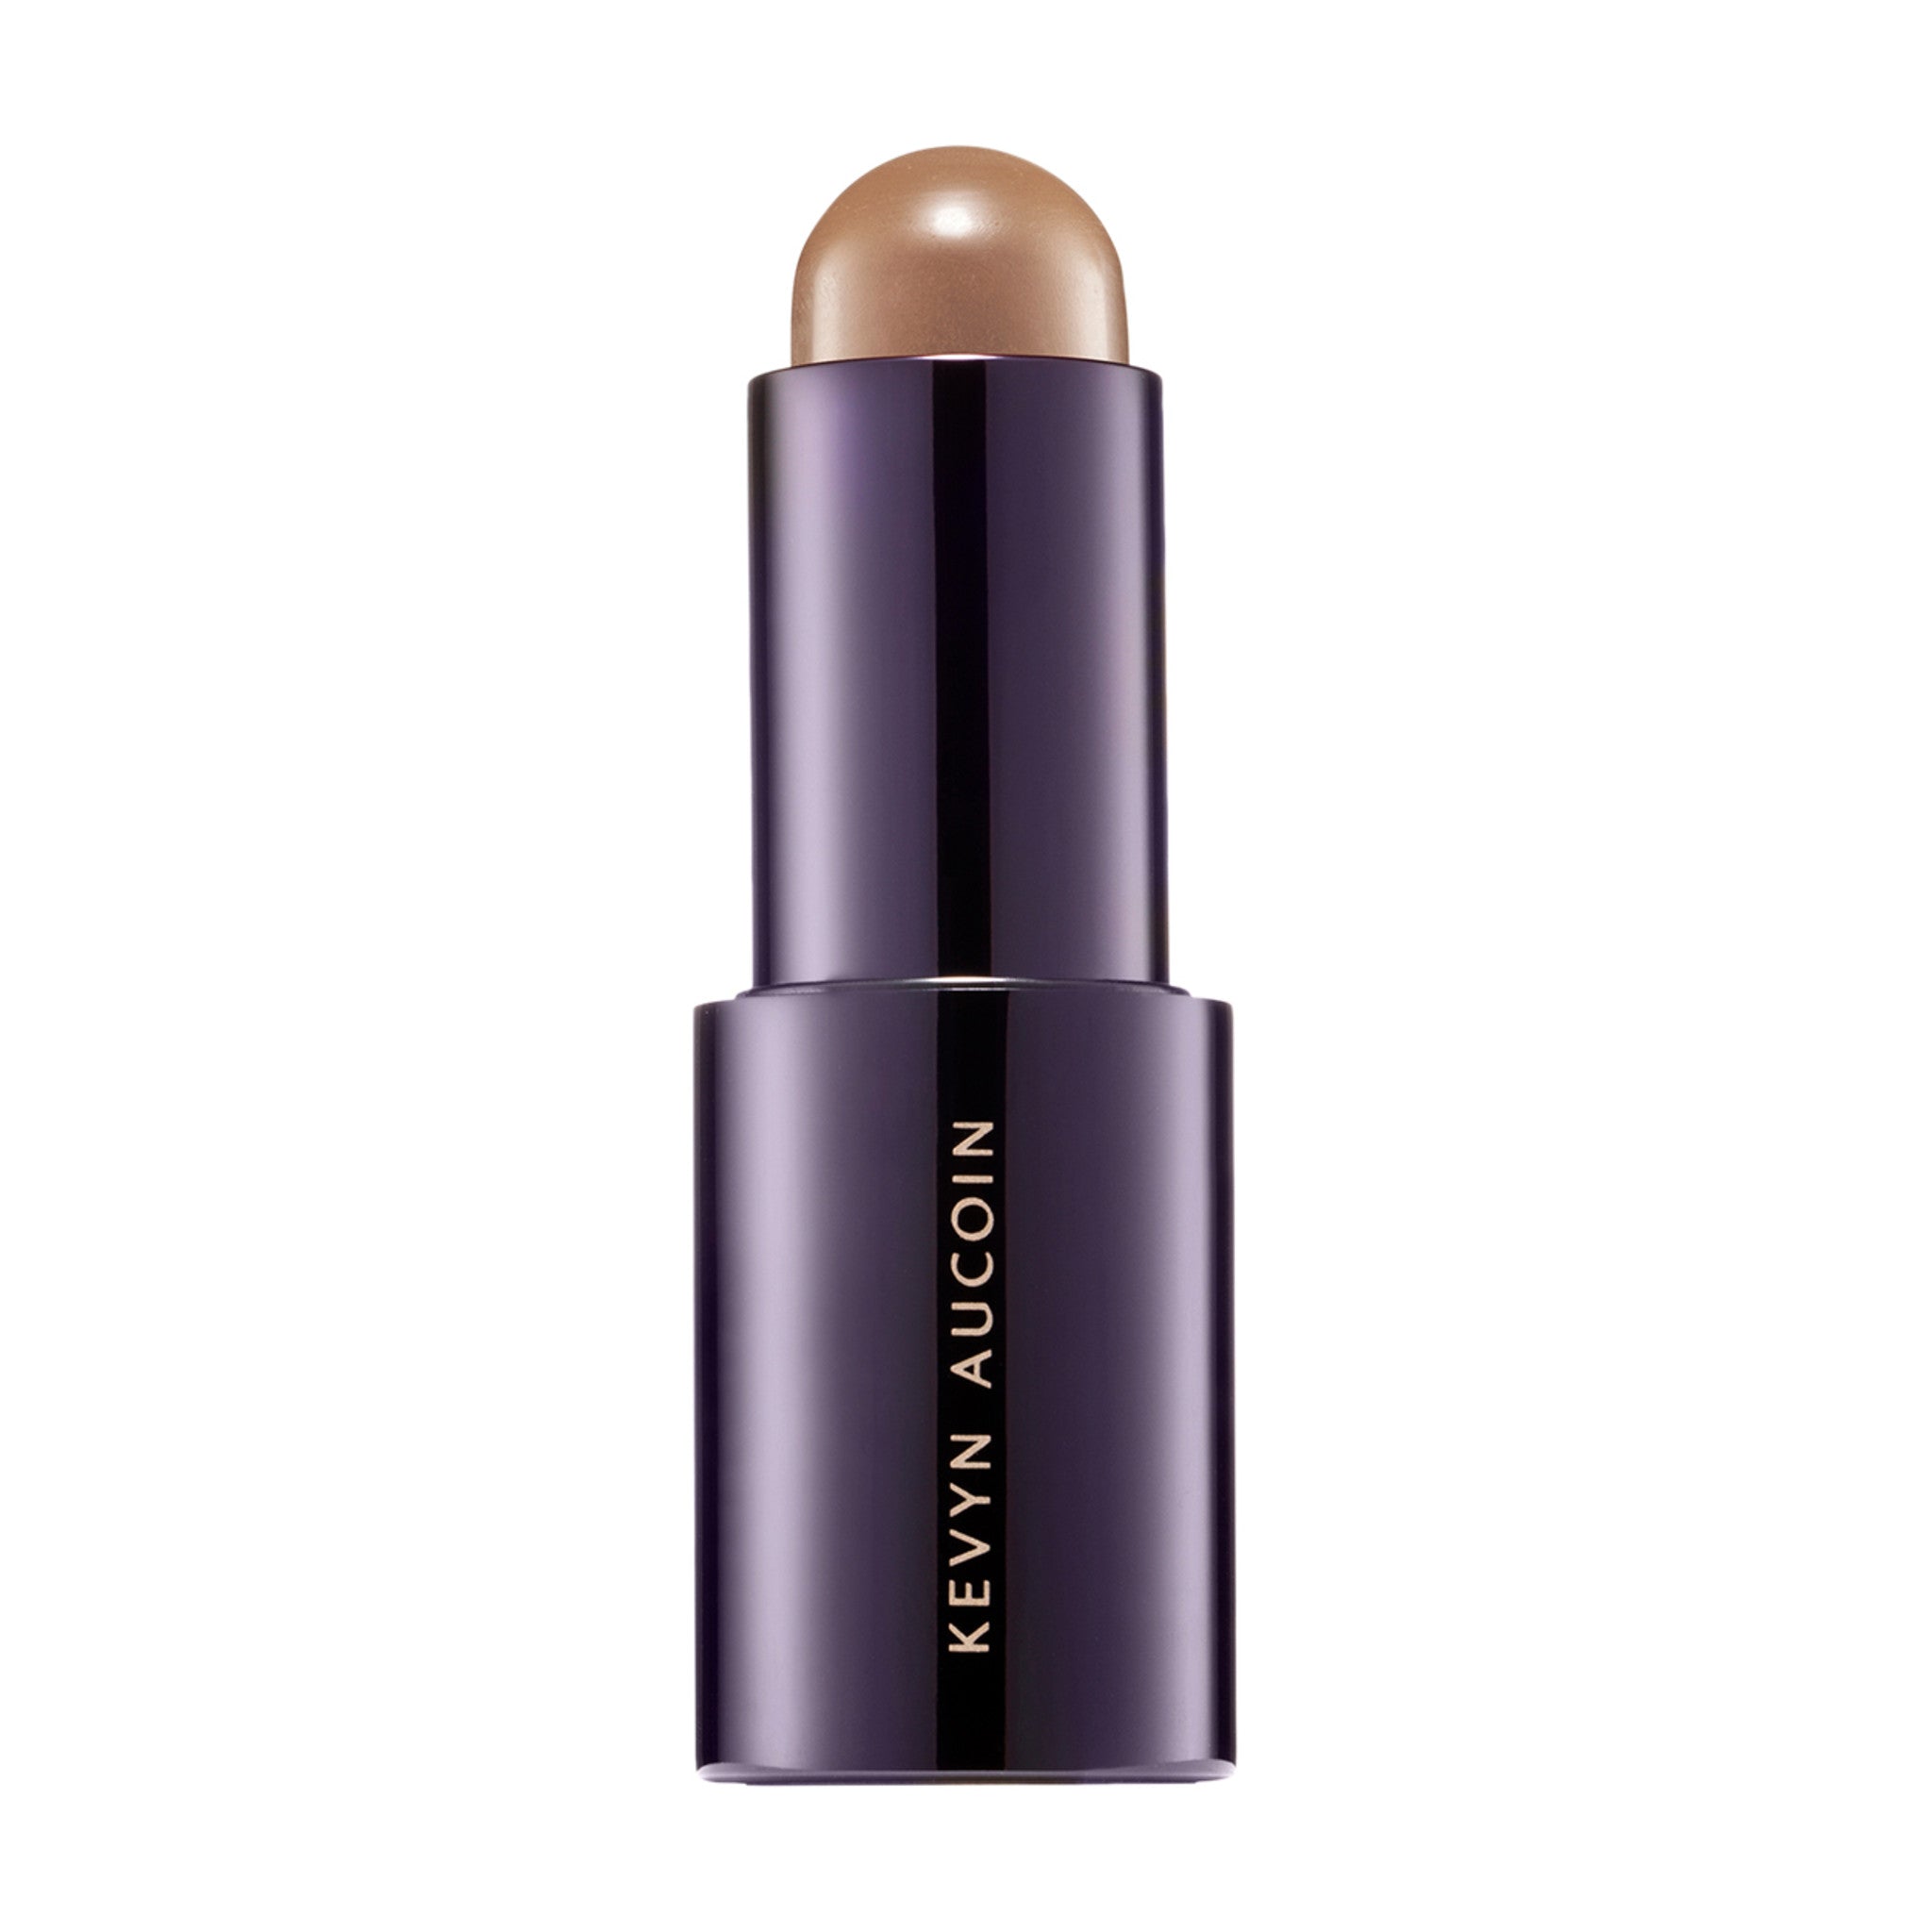 Kevyn Aucoin The Contrast Stick Color/Shade variant: Chiseled main image.